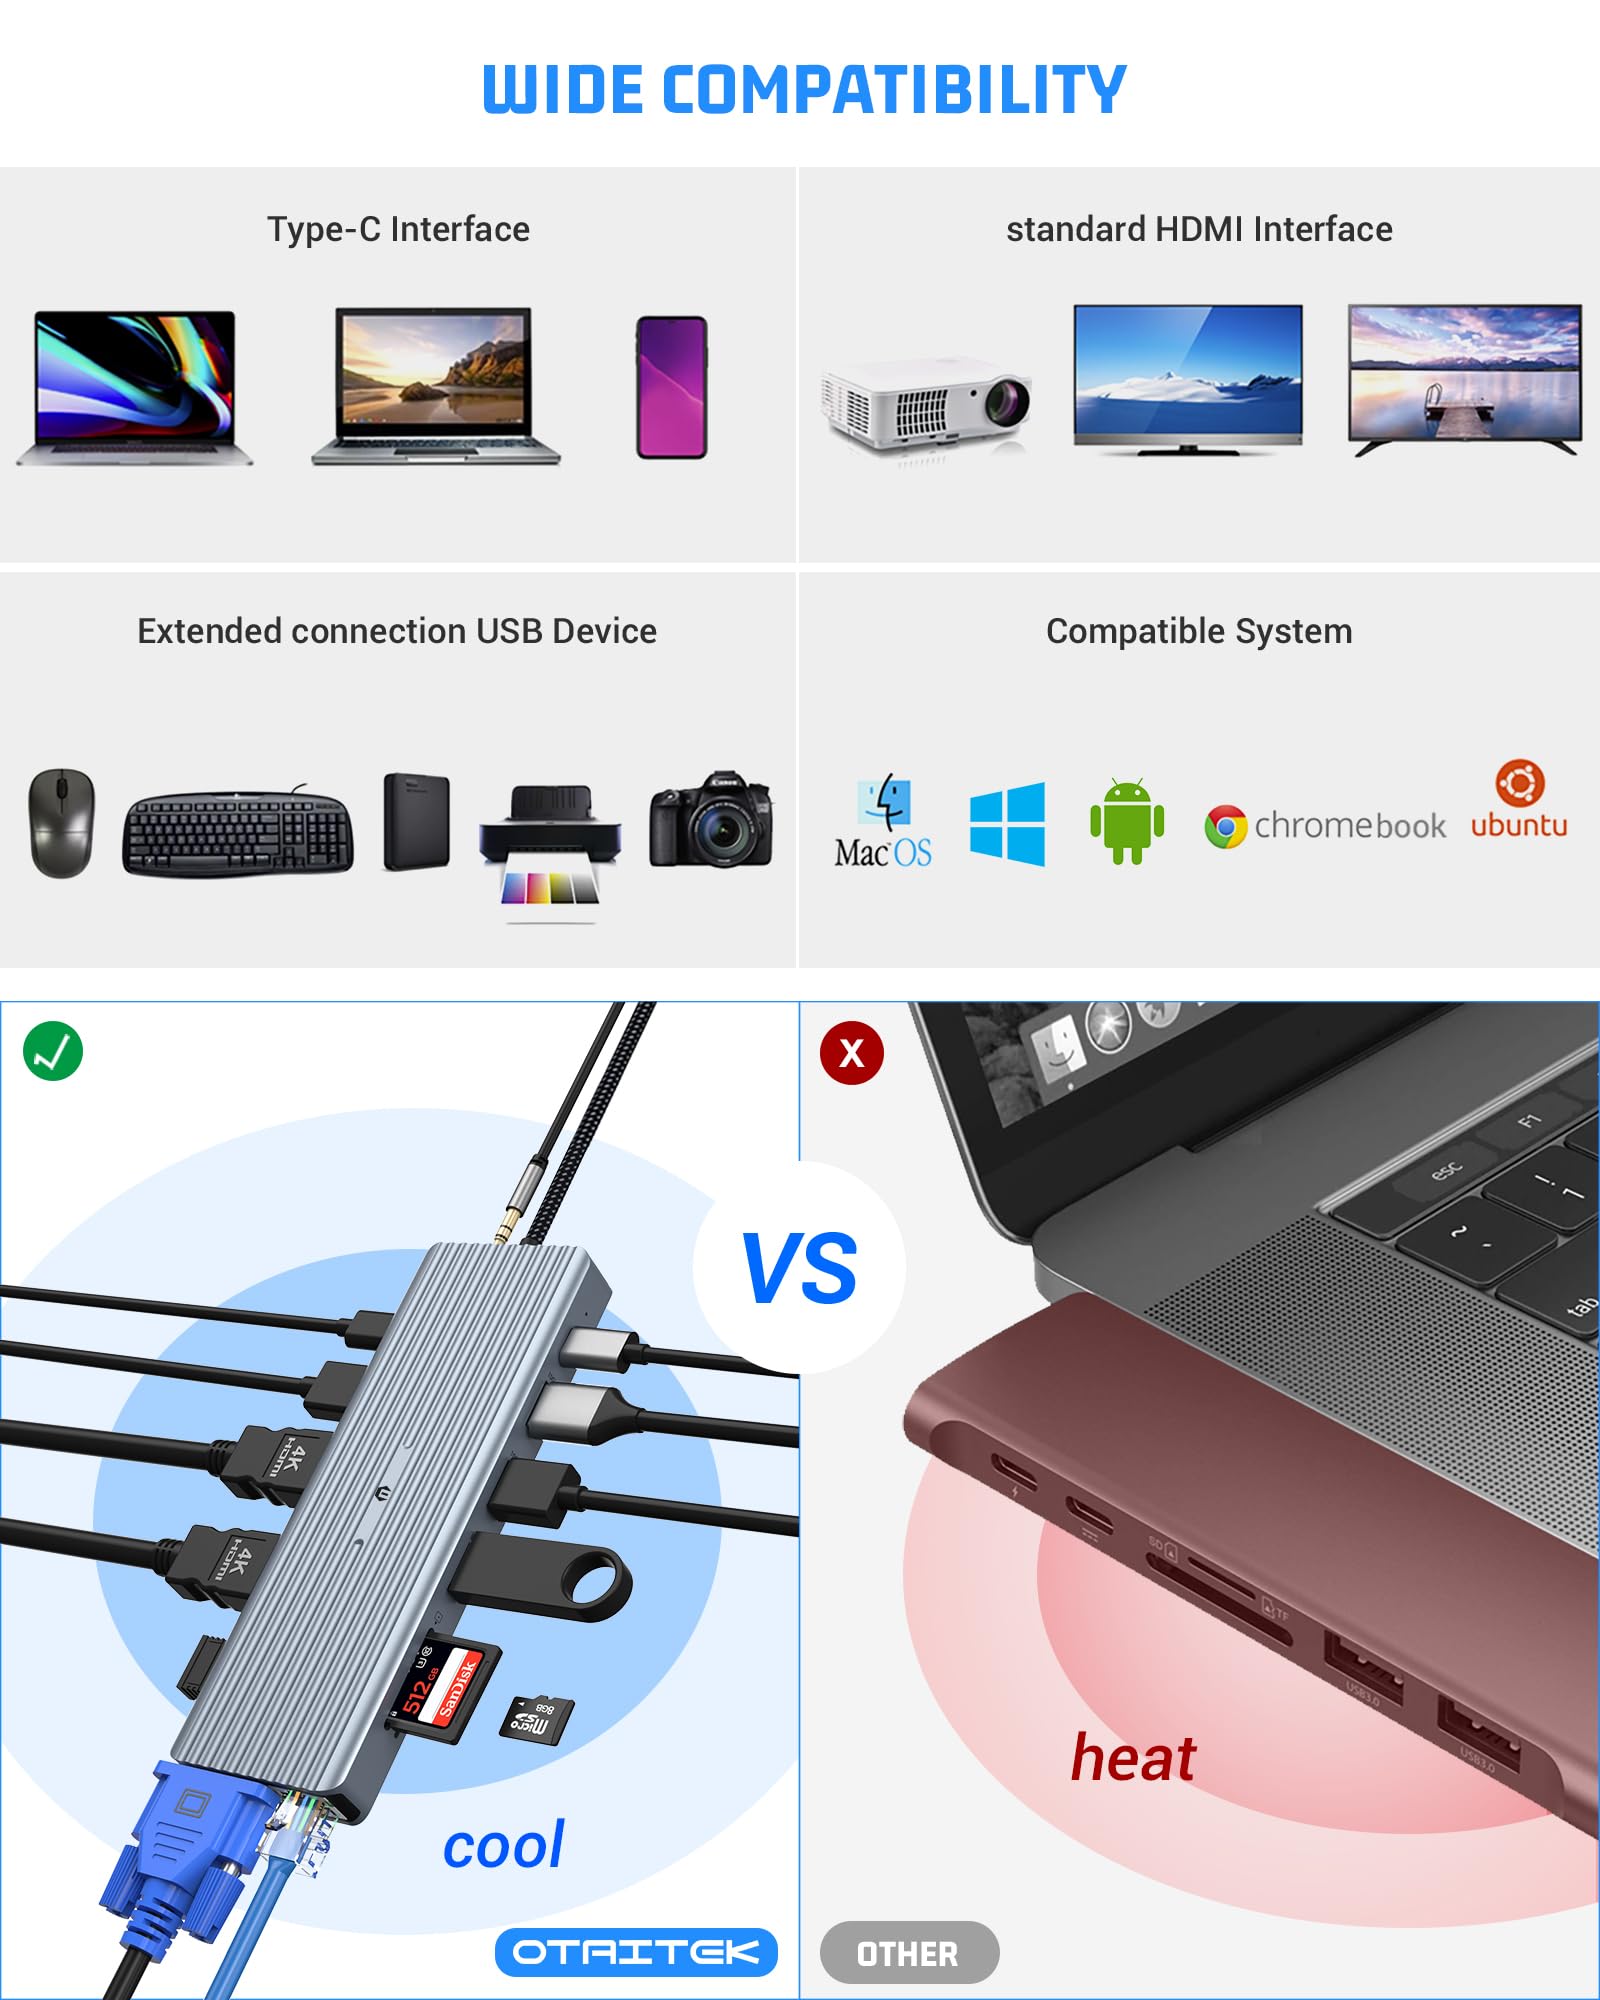 oditton USB C Hub, 14 in 1 Docking Station Featuring Dual 4K HDMI, VGA, USB A 3.1, USB C 3.1, 4 USB A 2.0, Gigabit Ethernet, SD&TF Card Slots, 100W PD, and 3.5mm Jack Broad Device Compatibility